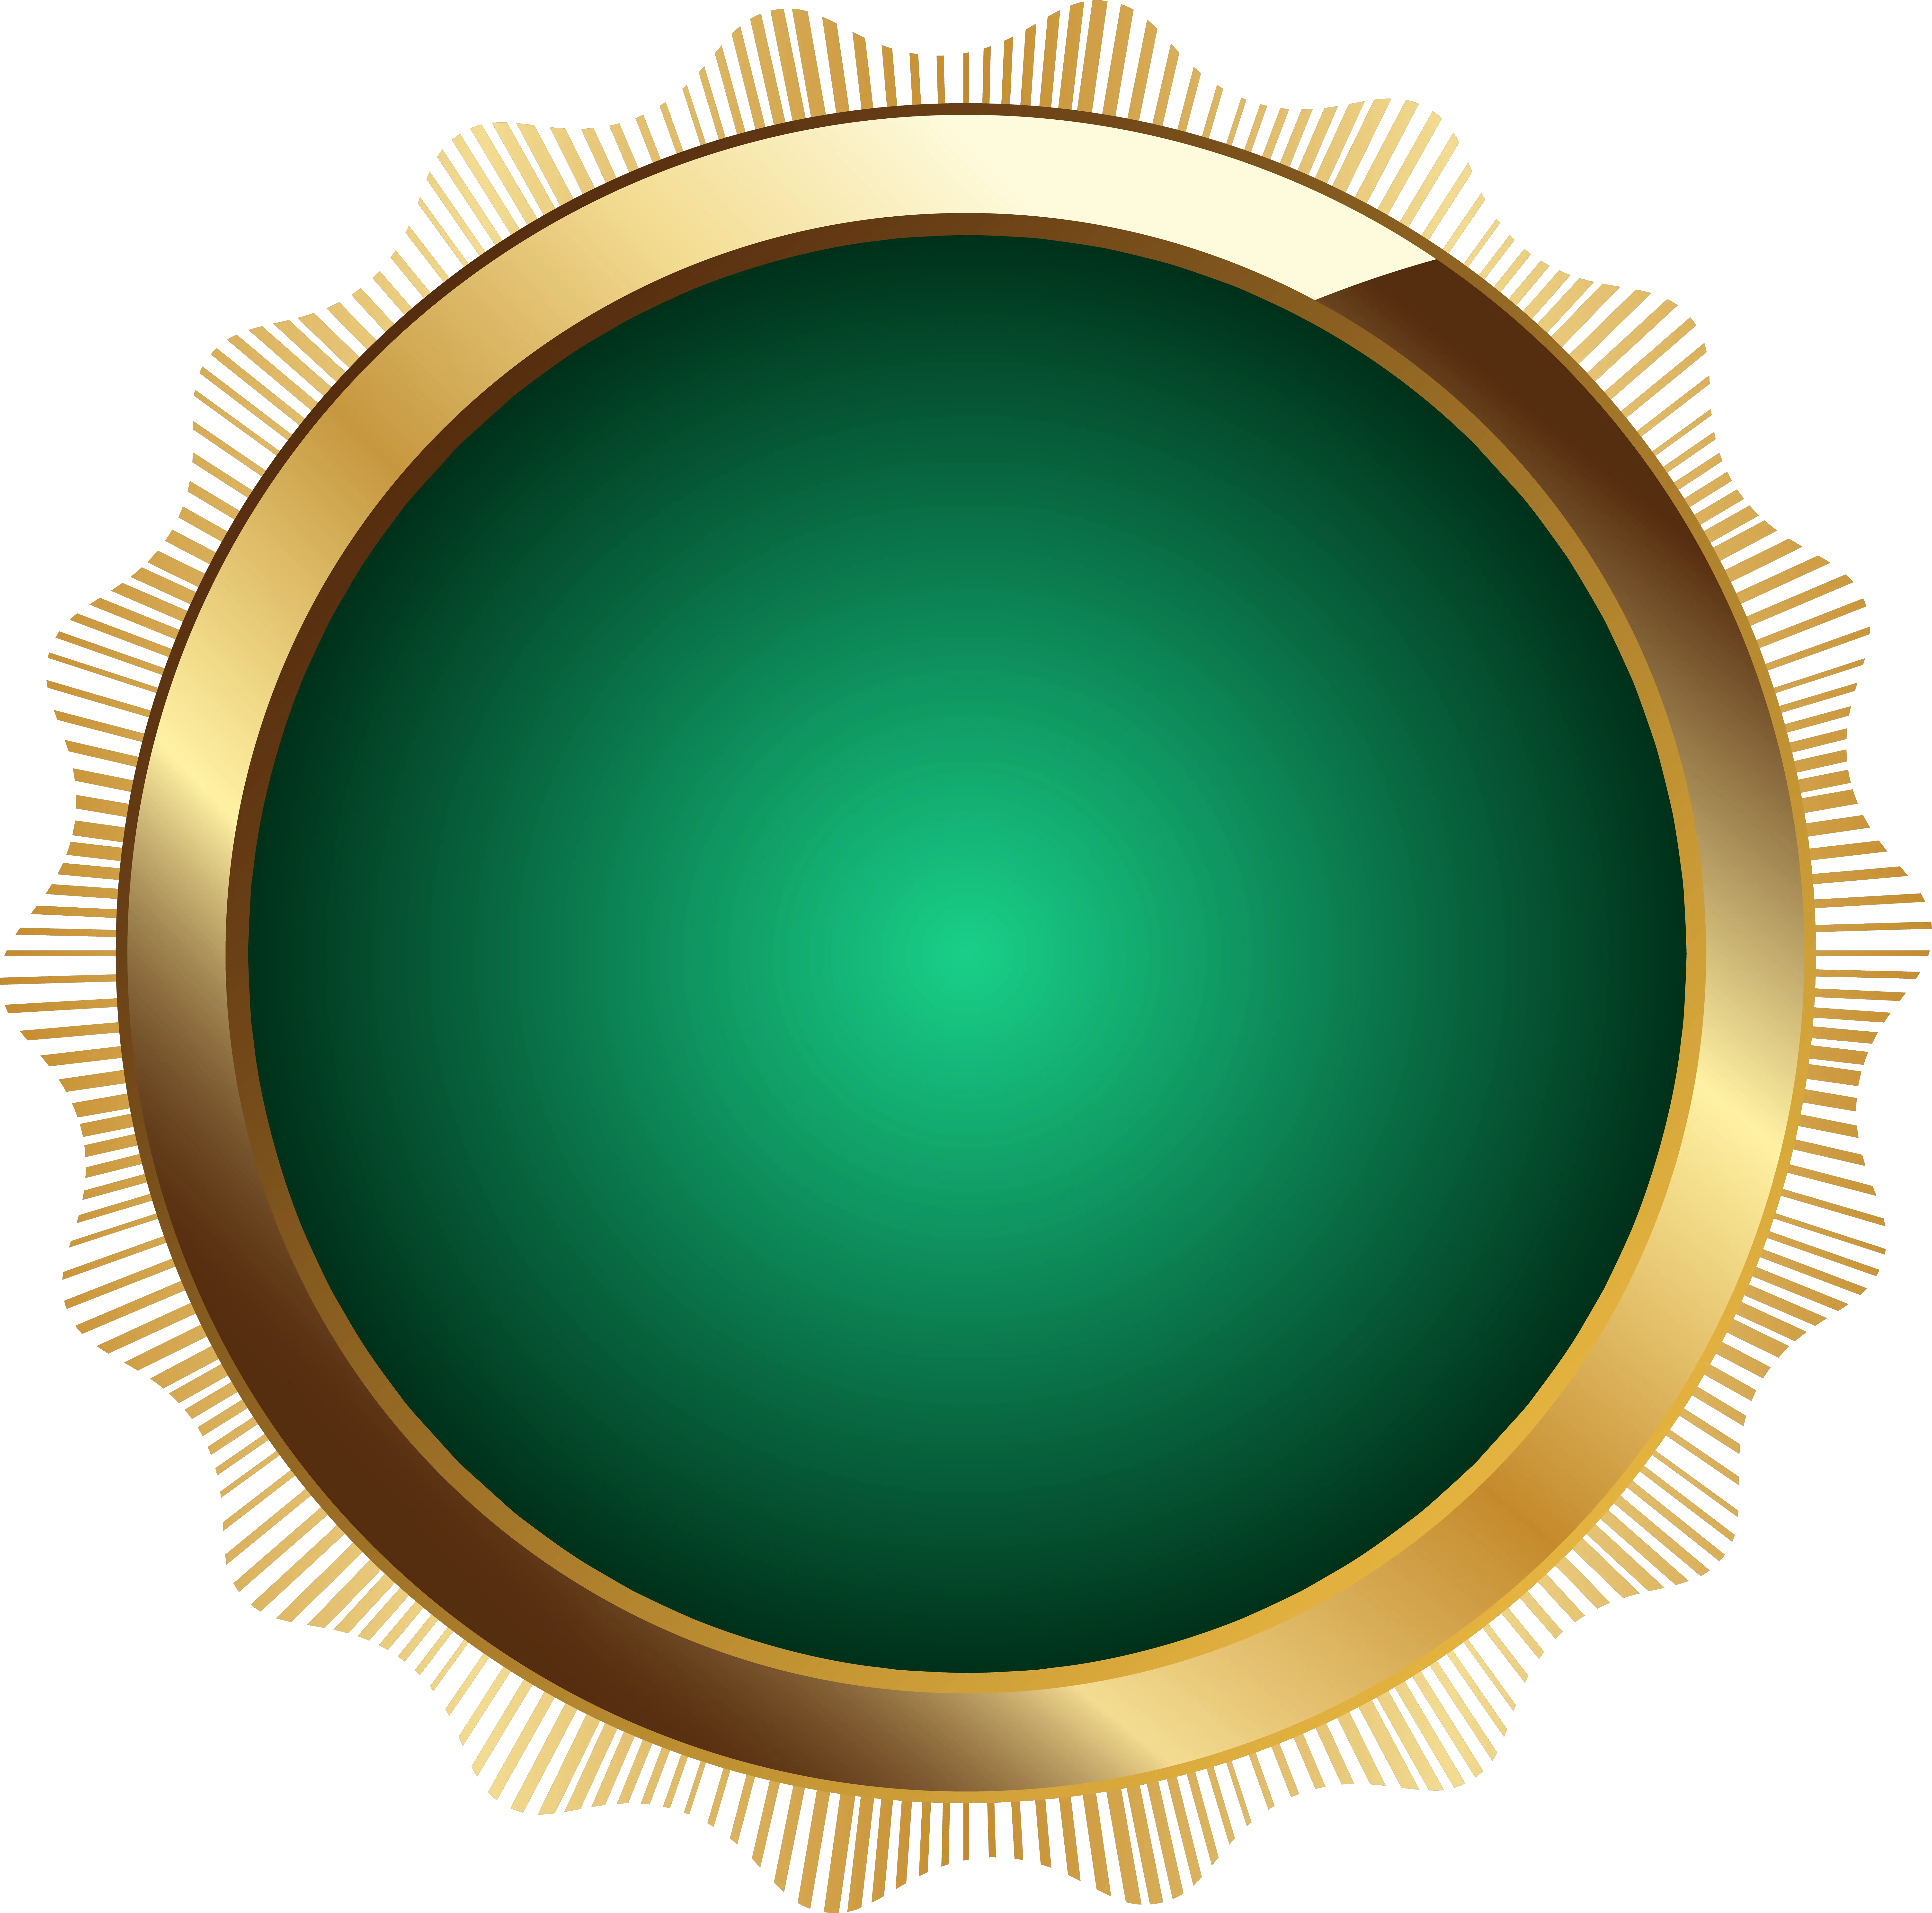 Seal Badge Green Png Transparent Clip Art In 2020 Banner Texture Background